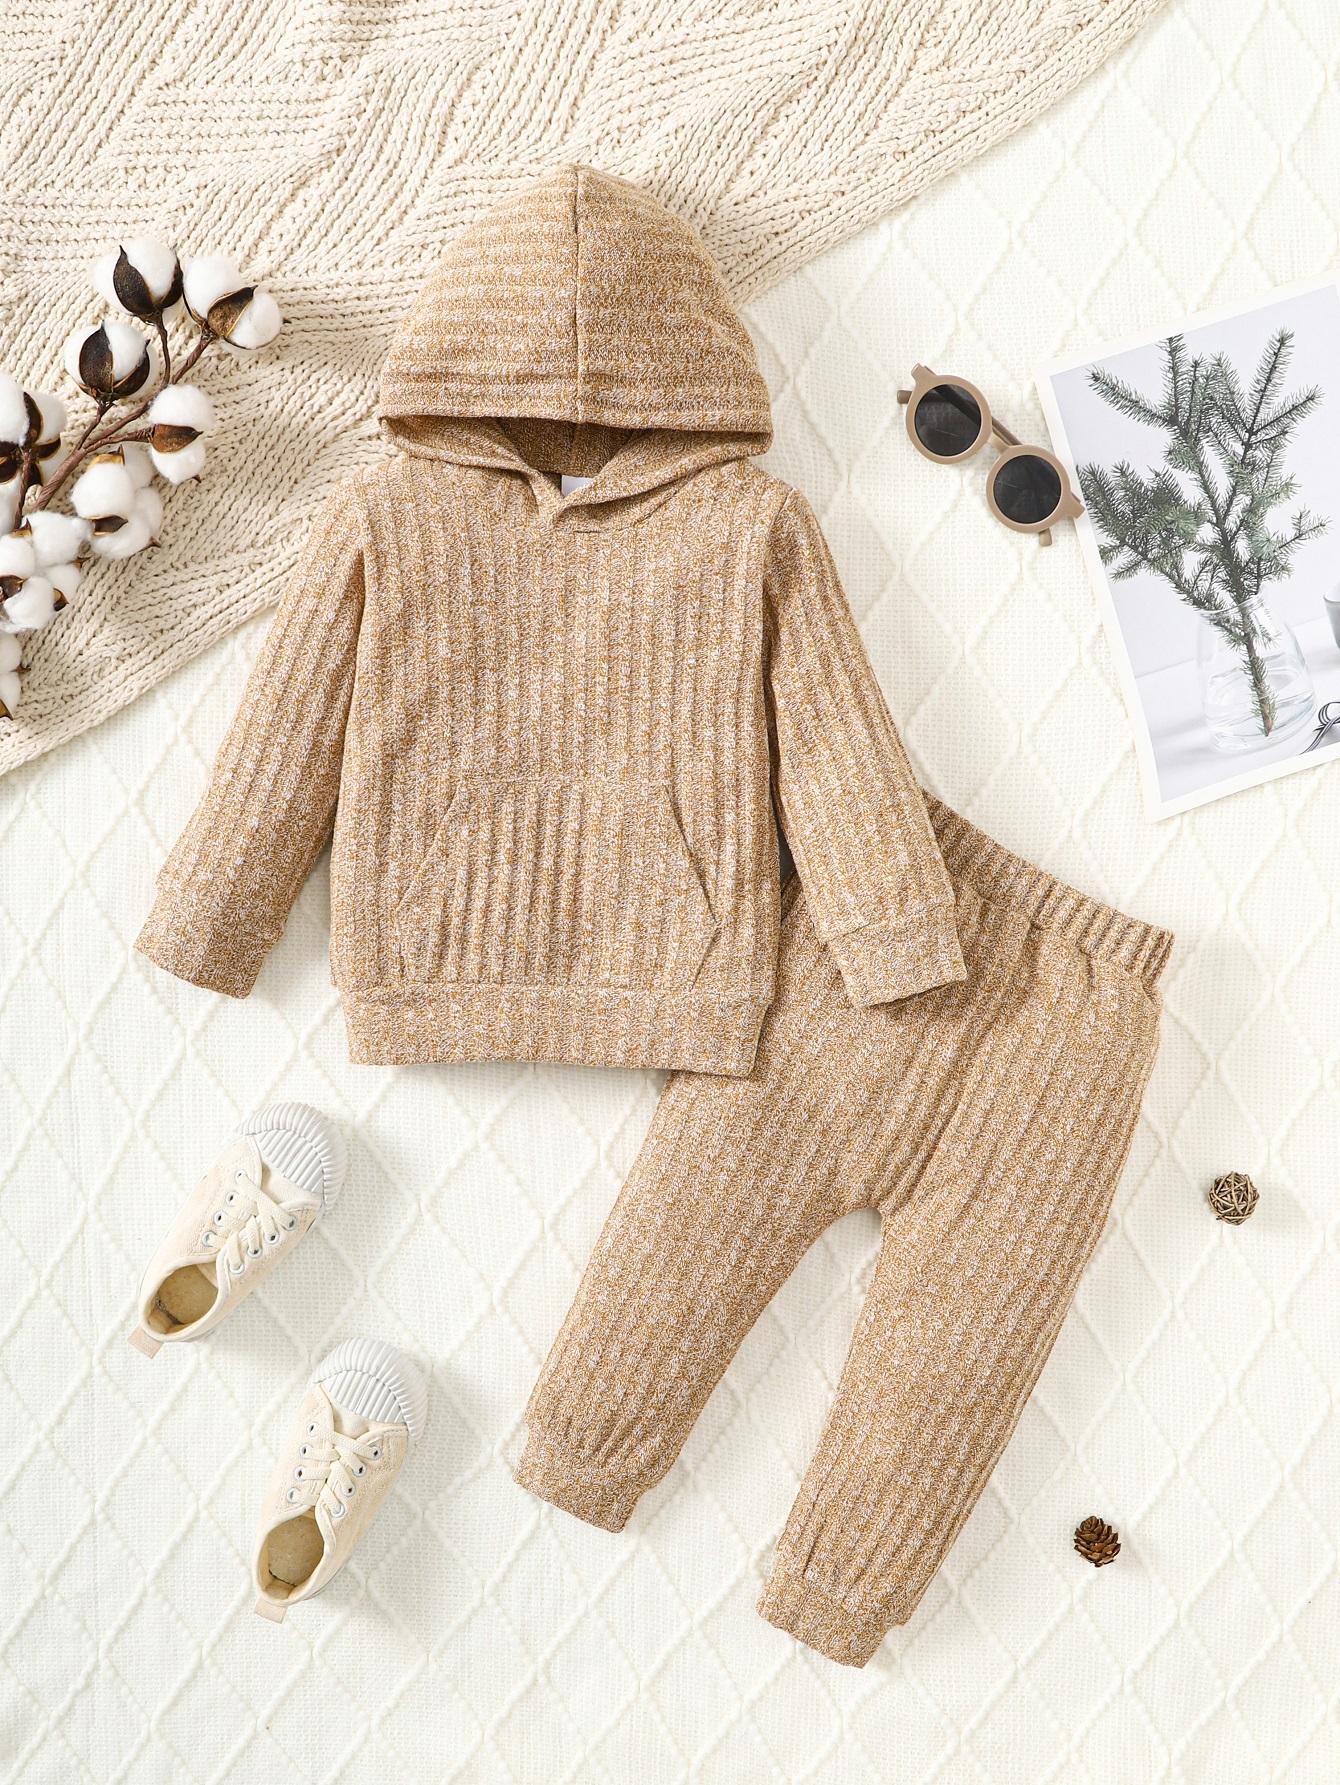 6M-3Y READY STOCK Baby Boys Clothes Solid Color Casual Knitted Long Sleeve Hoodies Tops Elastic Pants 2Pcs Outfits Size: 6M-3Y Light Brown Catpapa 462308181